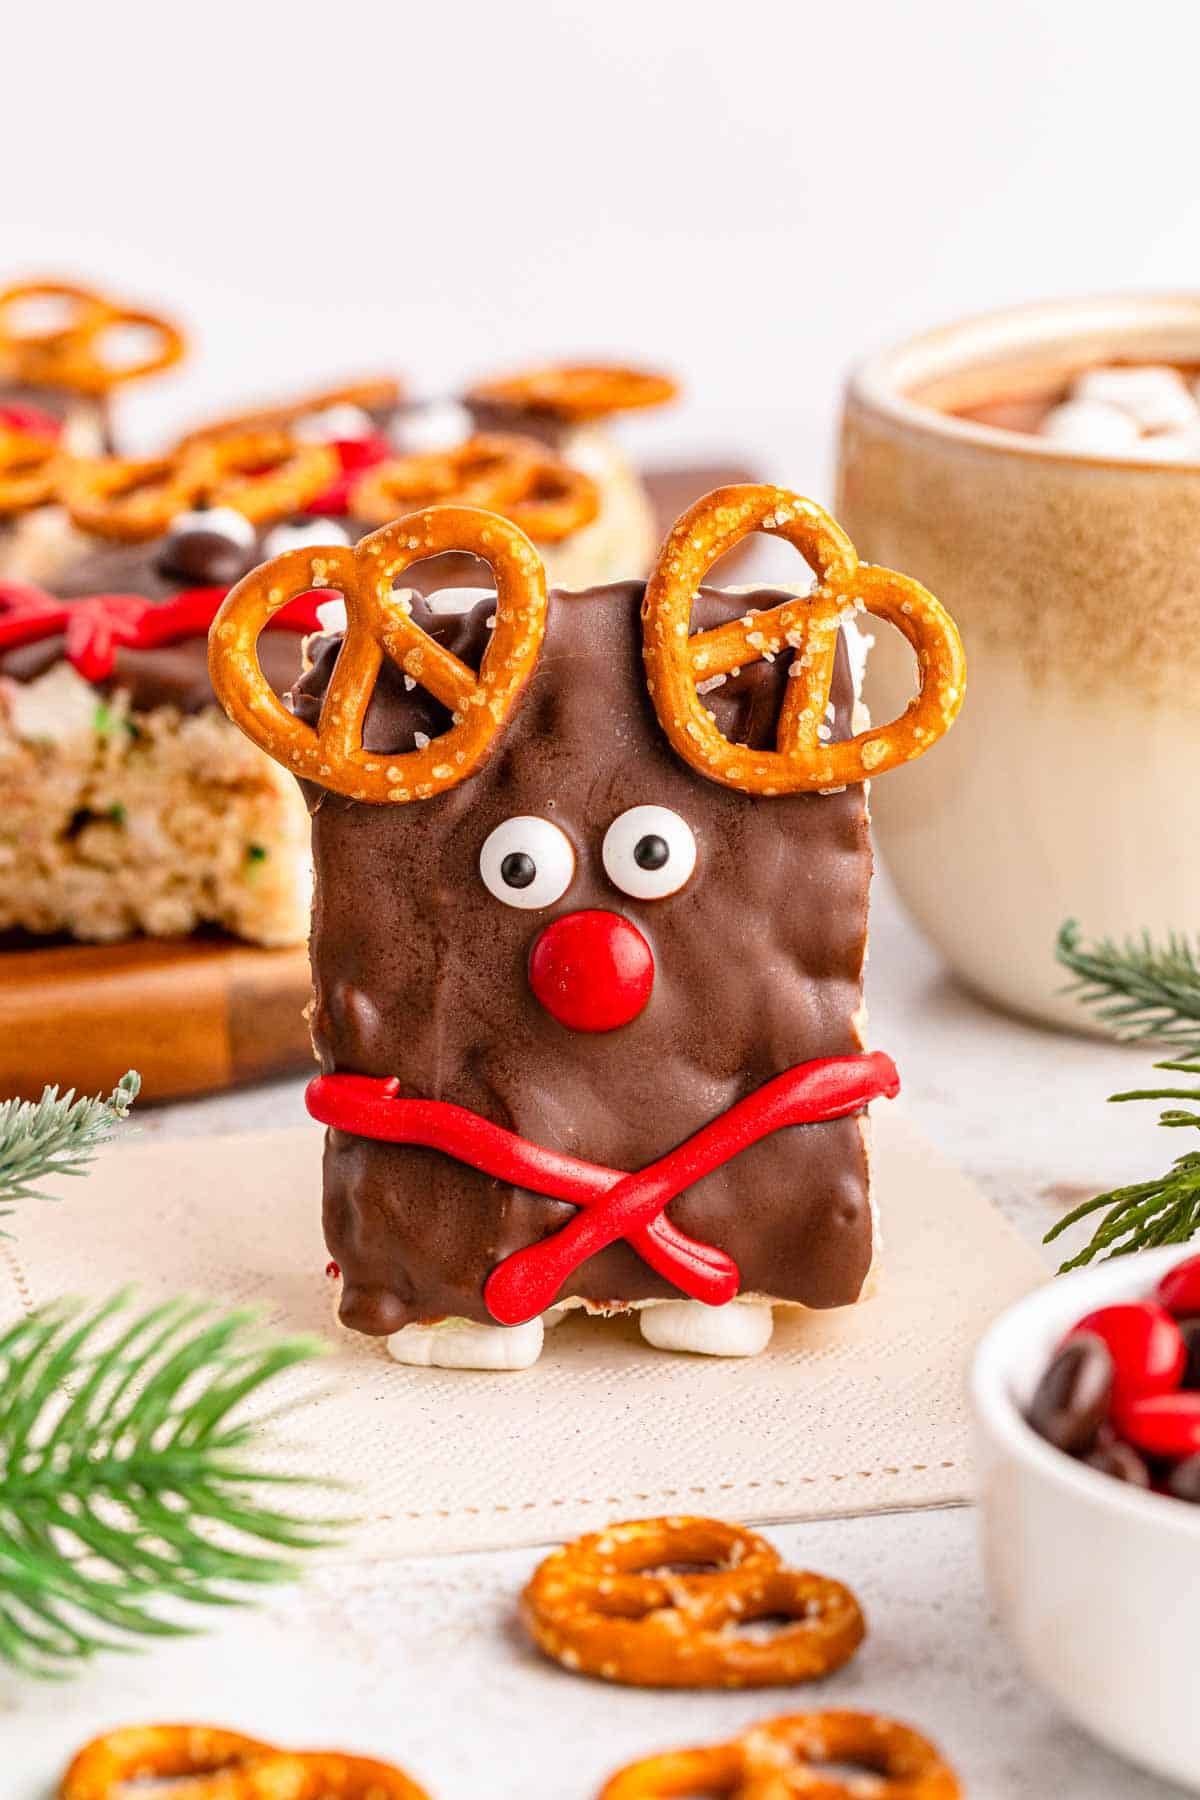 A reindeer rice krispies treat standing up with Christmas decor in the background.